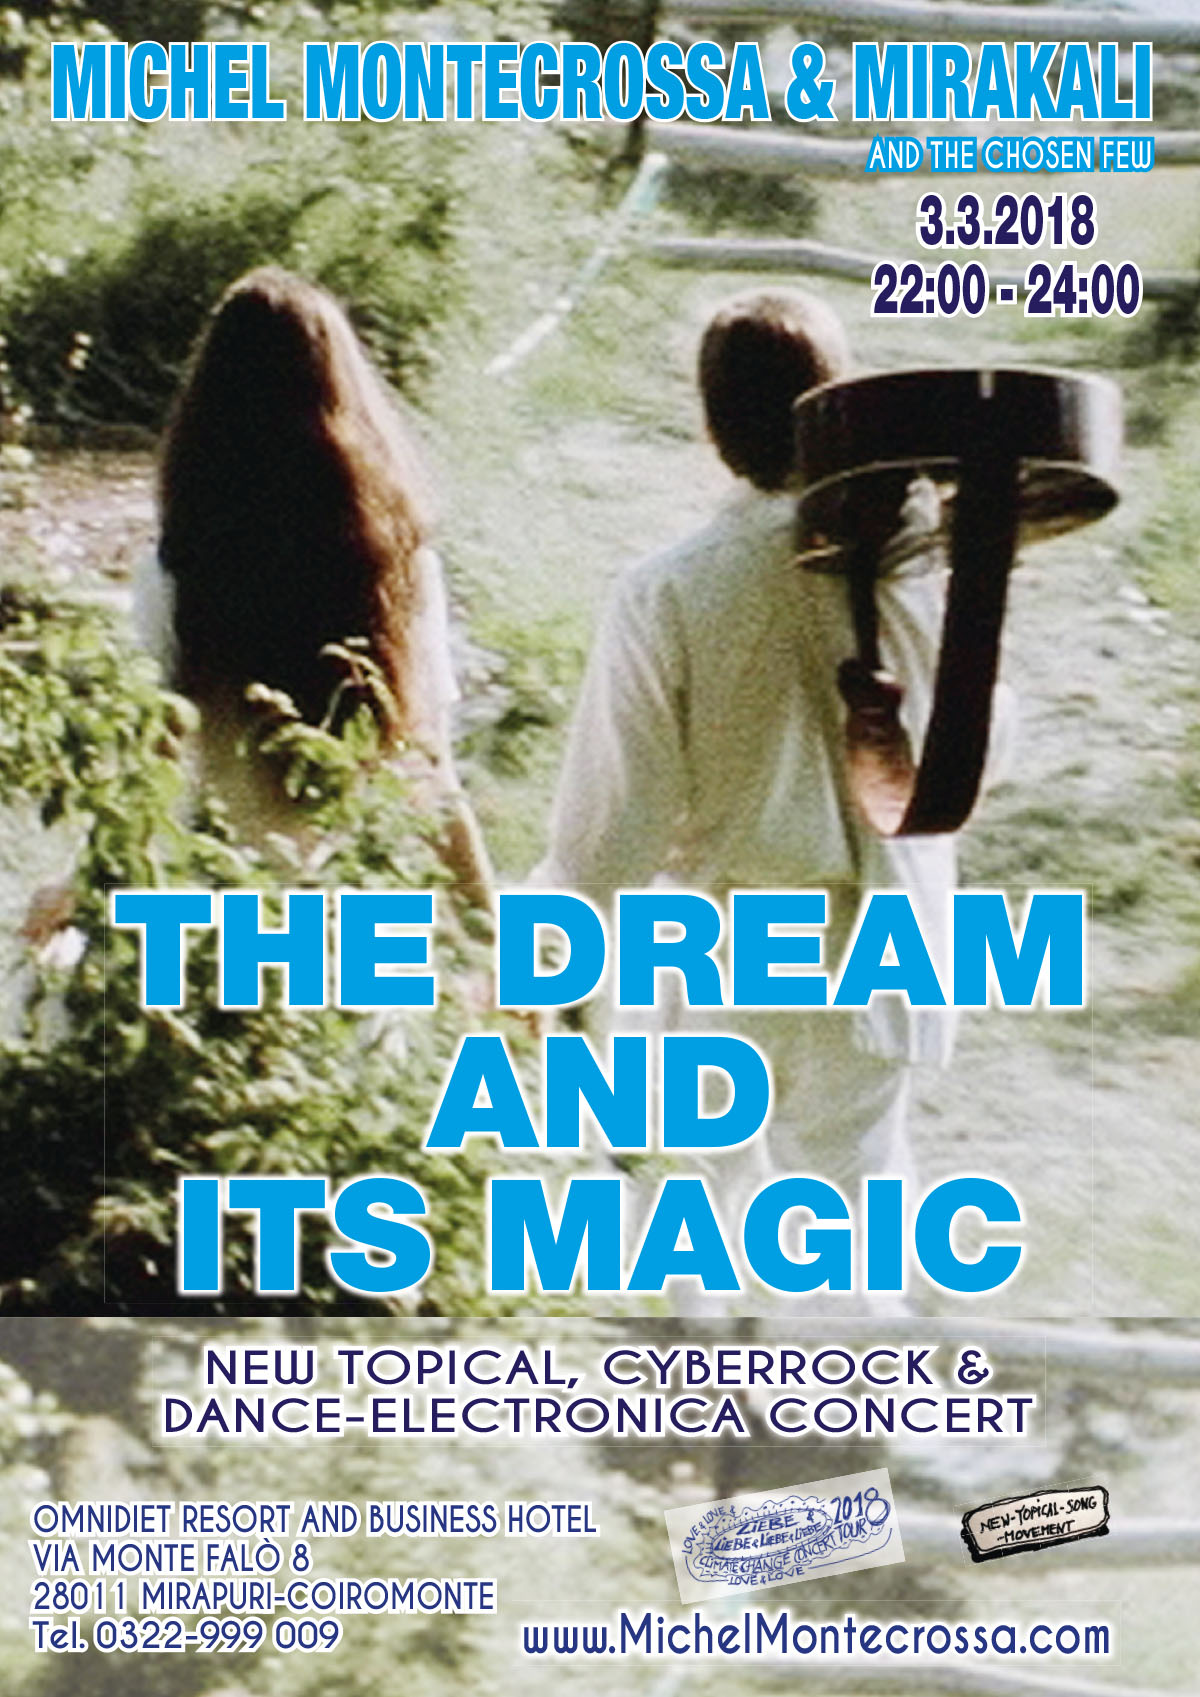 The Dream and its Magic Concert